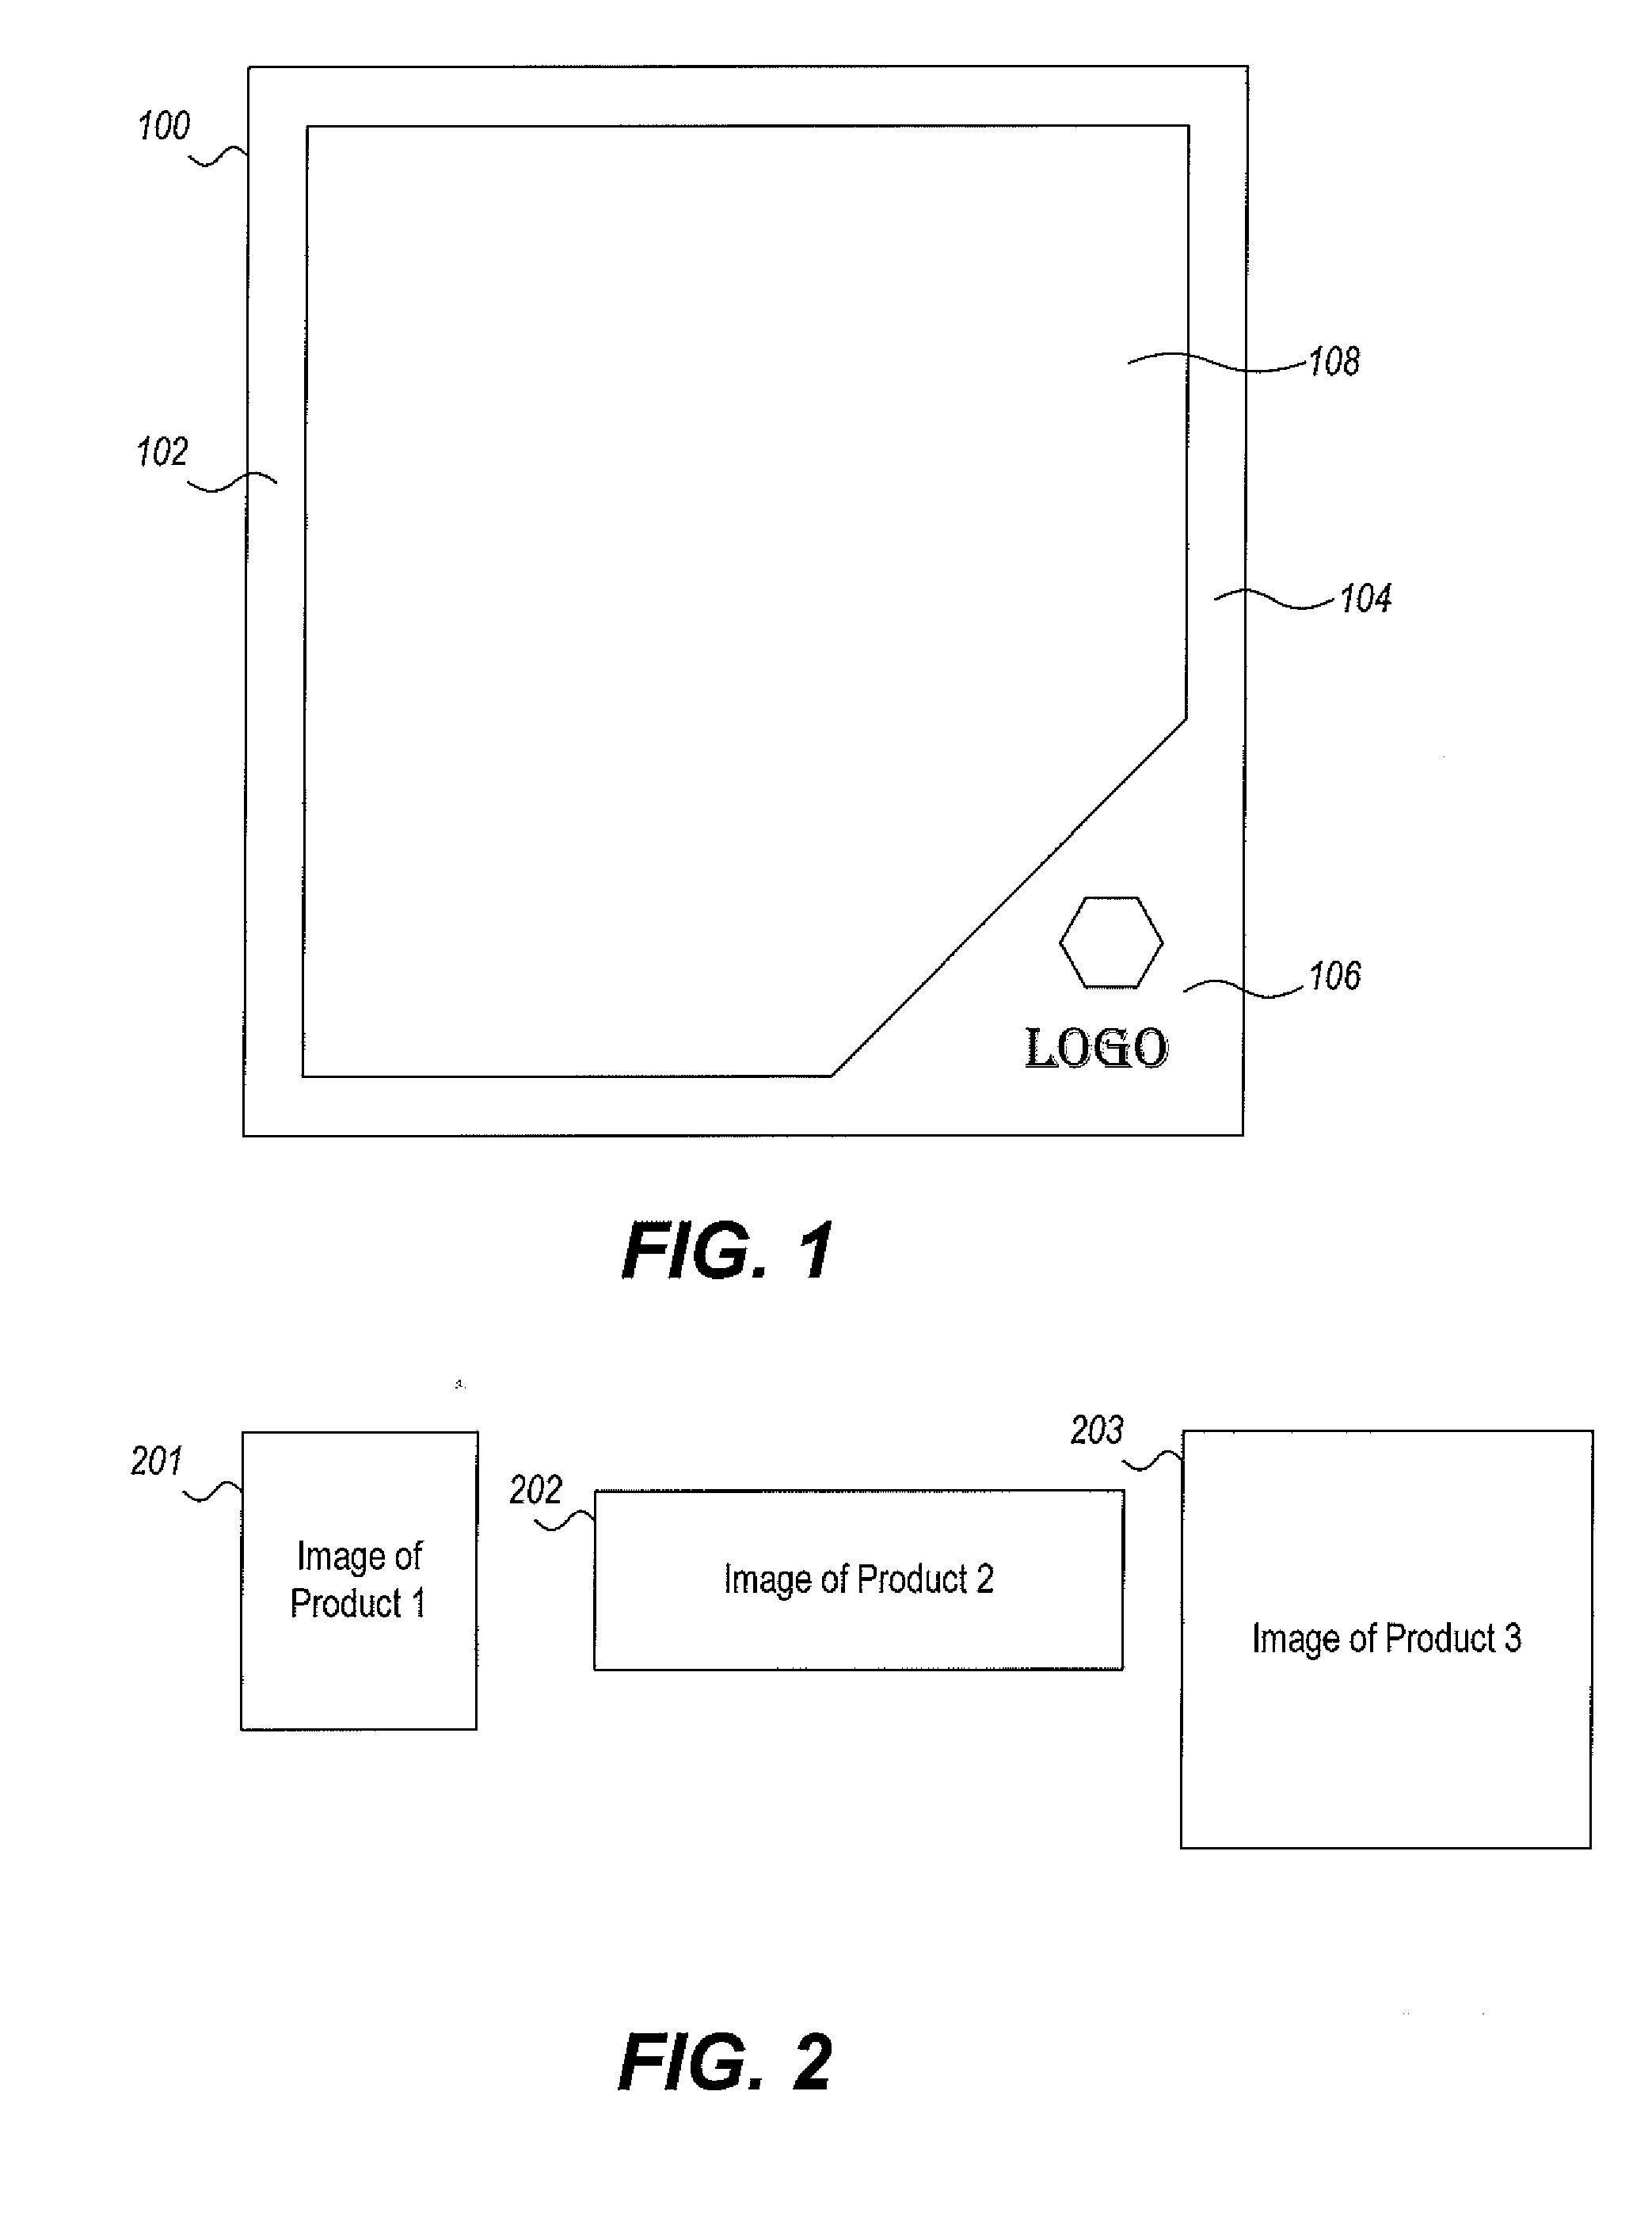 Method and system for dynamically arranging multiple product images in a preconfigured panel on an electronic display